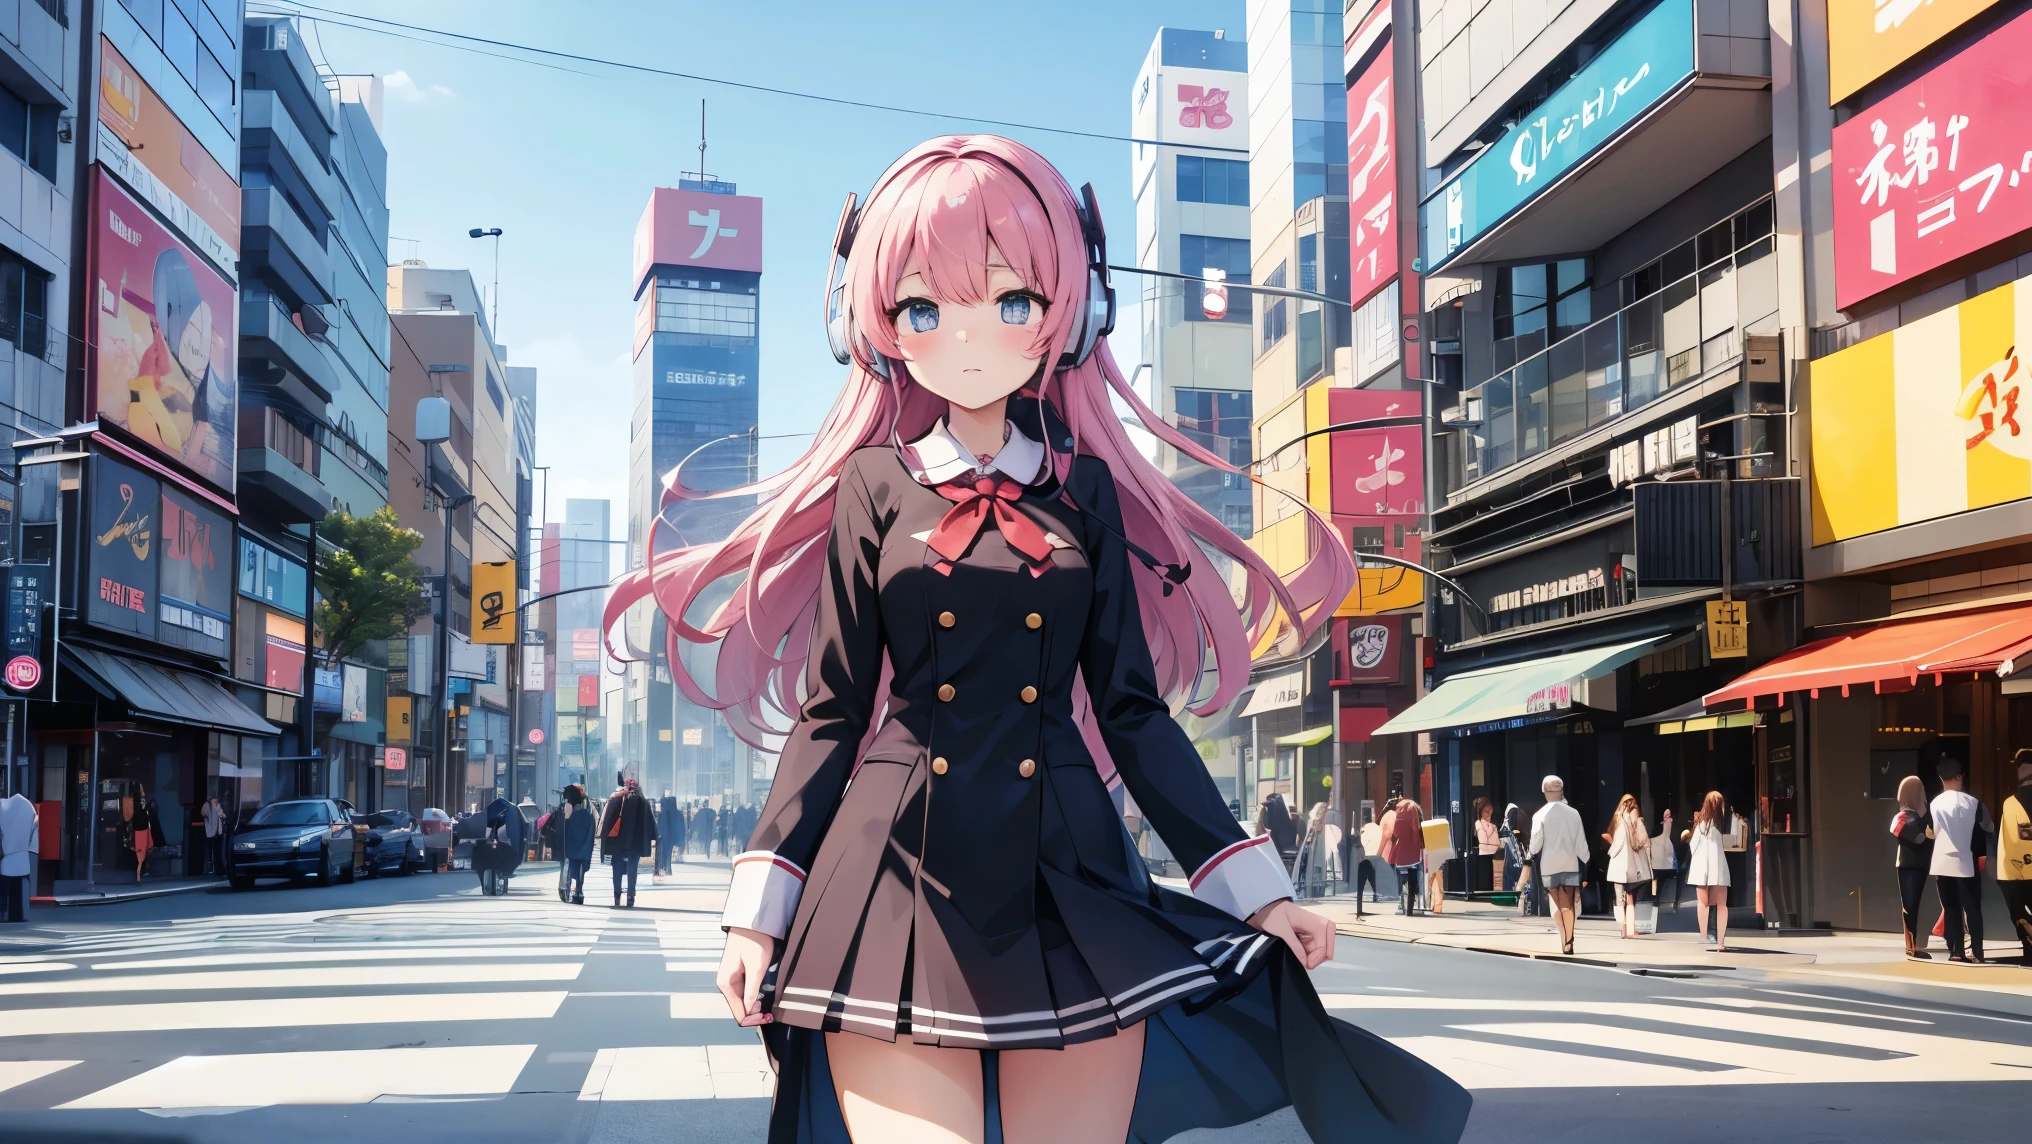 Anime Girls with headphones walking down the street in a , Beautiful mature , uniform、Beautiful girl anime visual, Kantai Collection Style,Manga illustration, Anime Girls, Illustrated , Hand-drawn anime illustration, young Anime Girls, Shibuya Ward Building District、Blurred Background、City Pop、whole body、Cowboy Shot、nostalgia、manga cover、Make the subject bigger、pastel colour、Soft impression、lovely